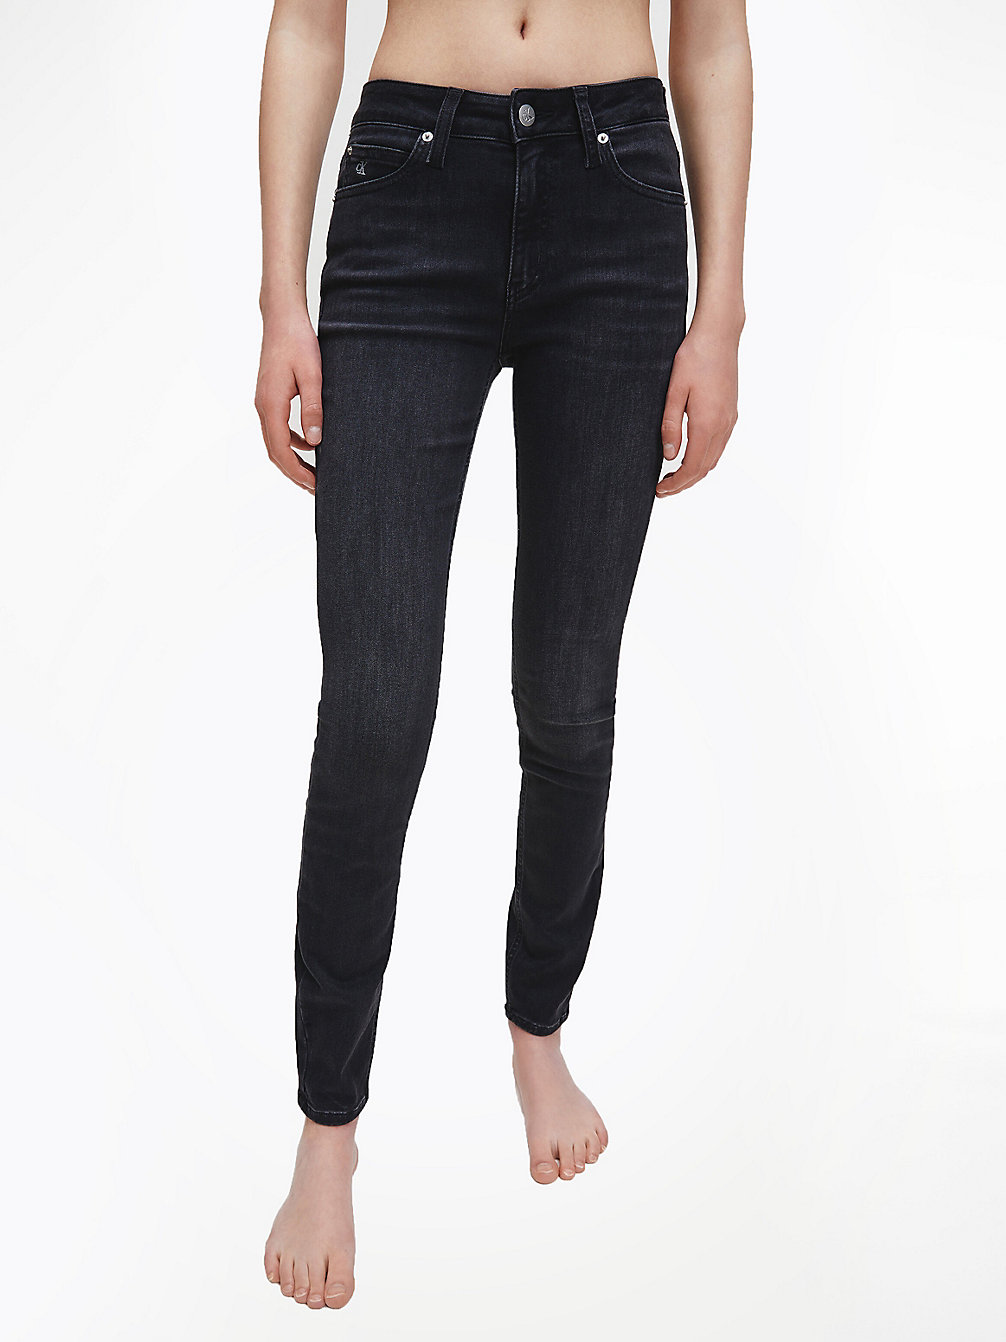 Mid Rise Skinny Jeans > ZZ002 WASHED BLACK > undefined mujer > Calvin Klein